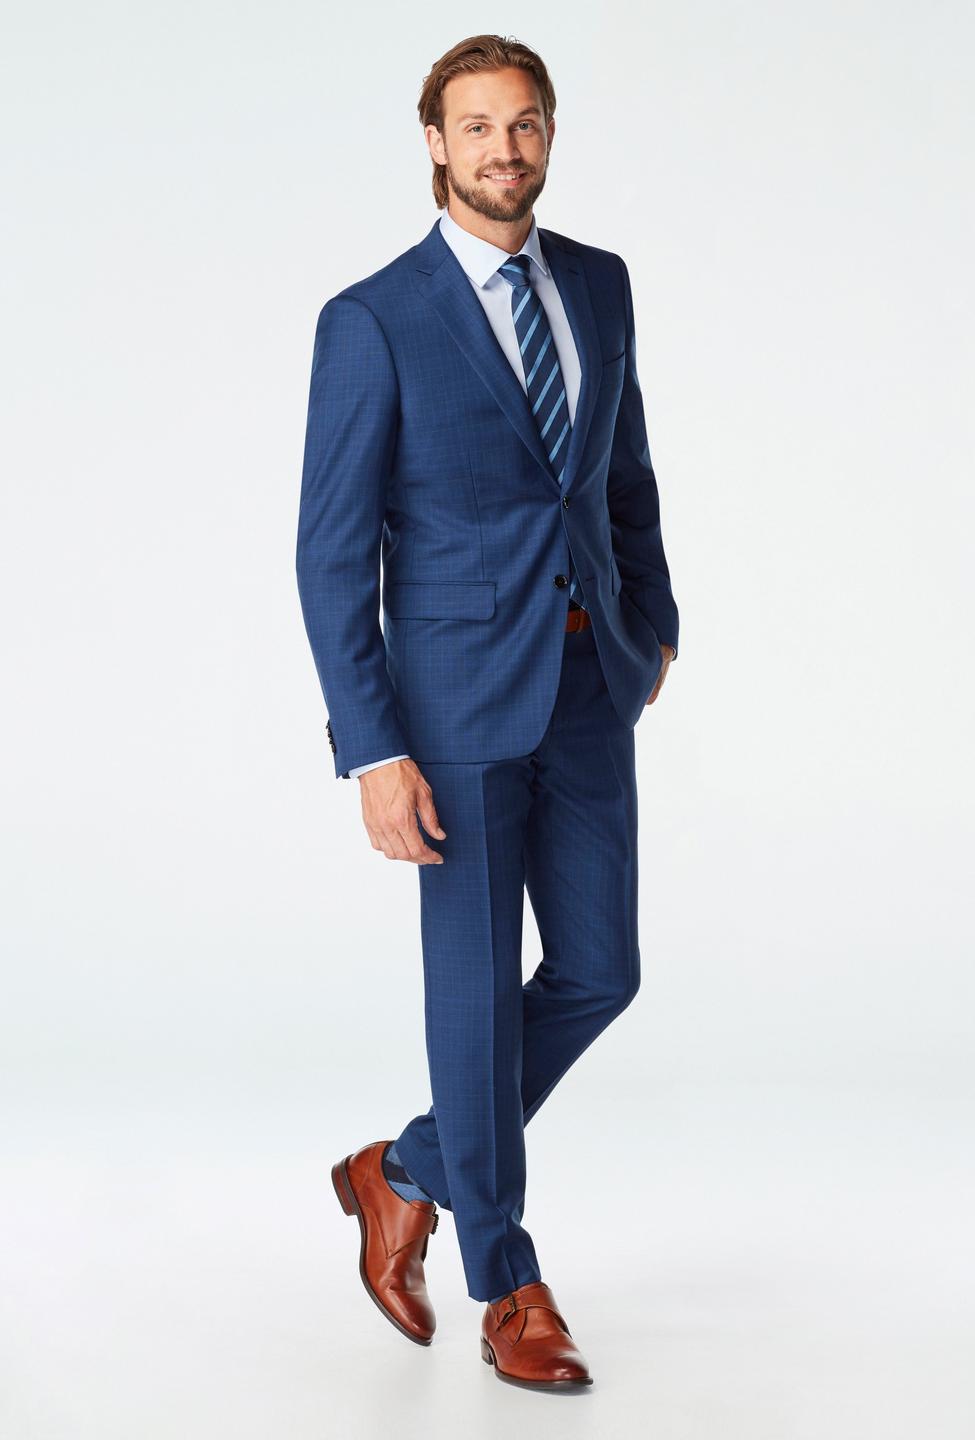 Blue suit - Harrogate Checked Design from Luxury Indochino Collection